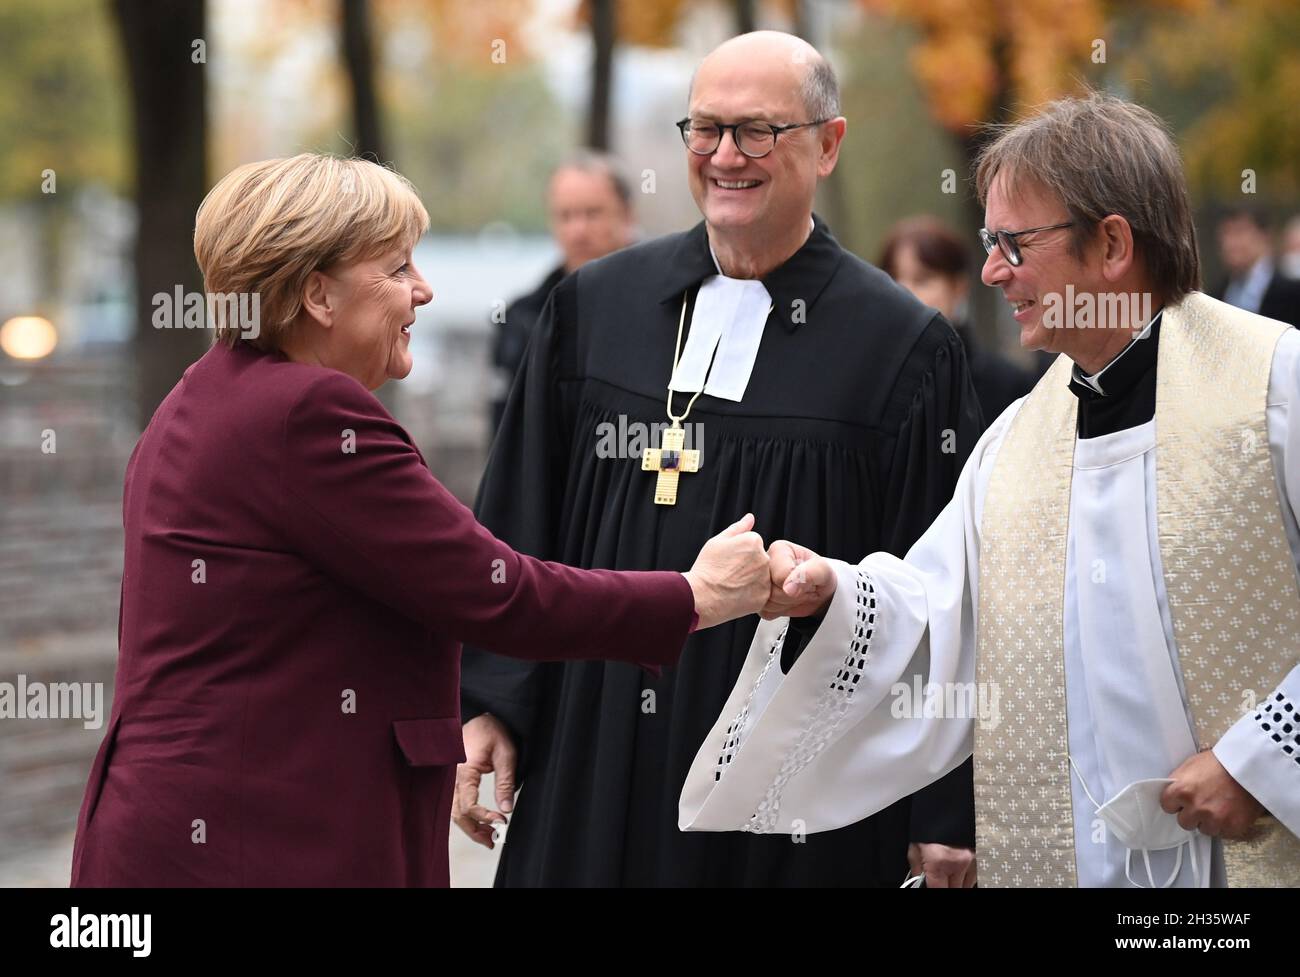 Berlin, Germany. 26th Oct, 2021. The Plenipotentiary of the Council of the Evangelical Church in Germany (EKD), Martin Dutzmann (m), and the Head of the Catholic Office in Berlin, Prelate Karl Jüsten (r), receive Federal Chancellor Angela Merkel (CDU) for the ecumenical service in the St. Mary's Church in Berlin before the constituent session of the new Bundestag. Credit: Britta Pedersen/dpa/Alamy Live News Stock Photo